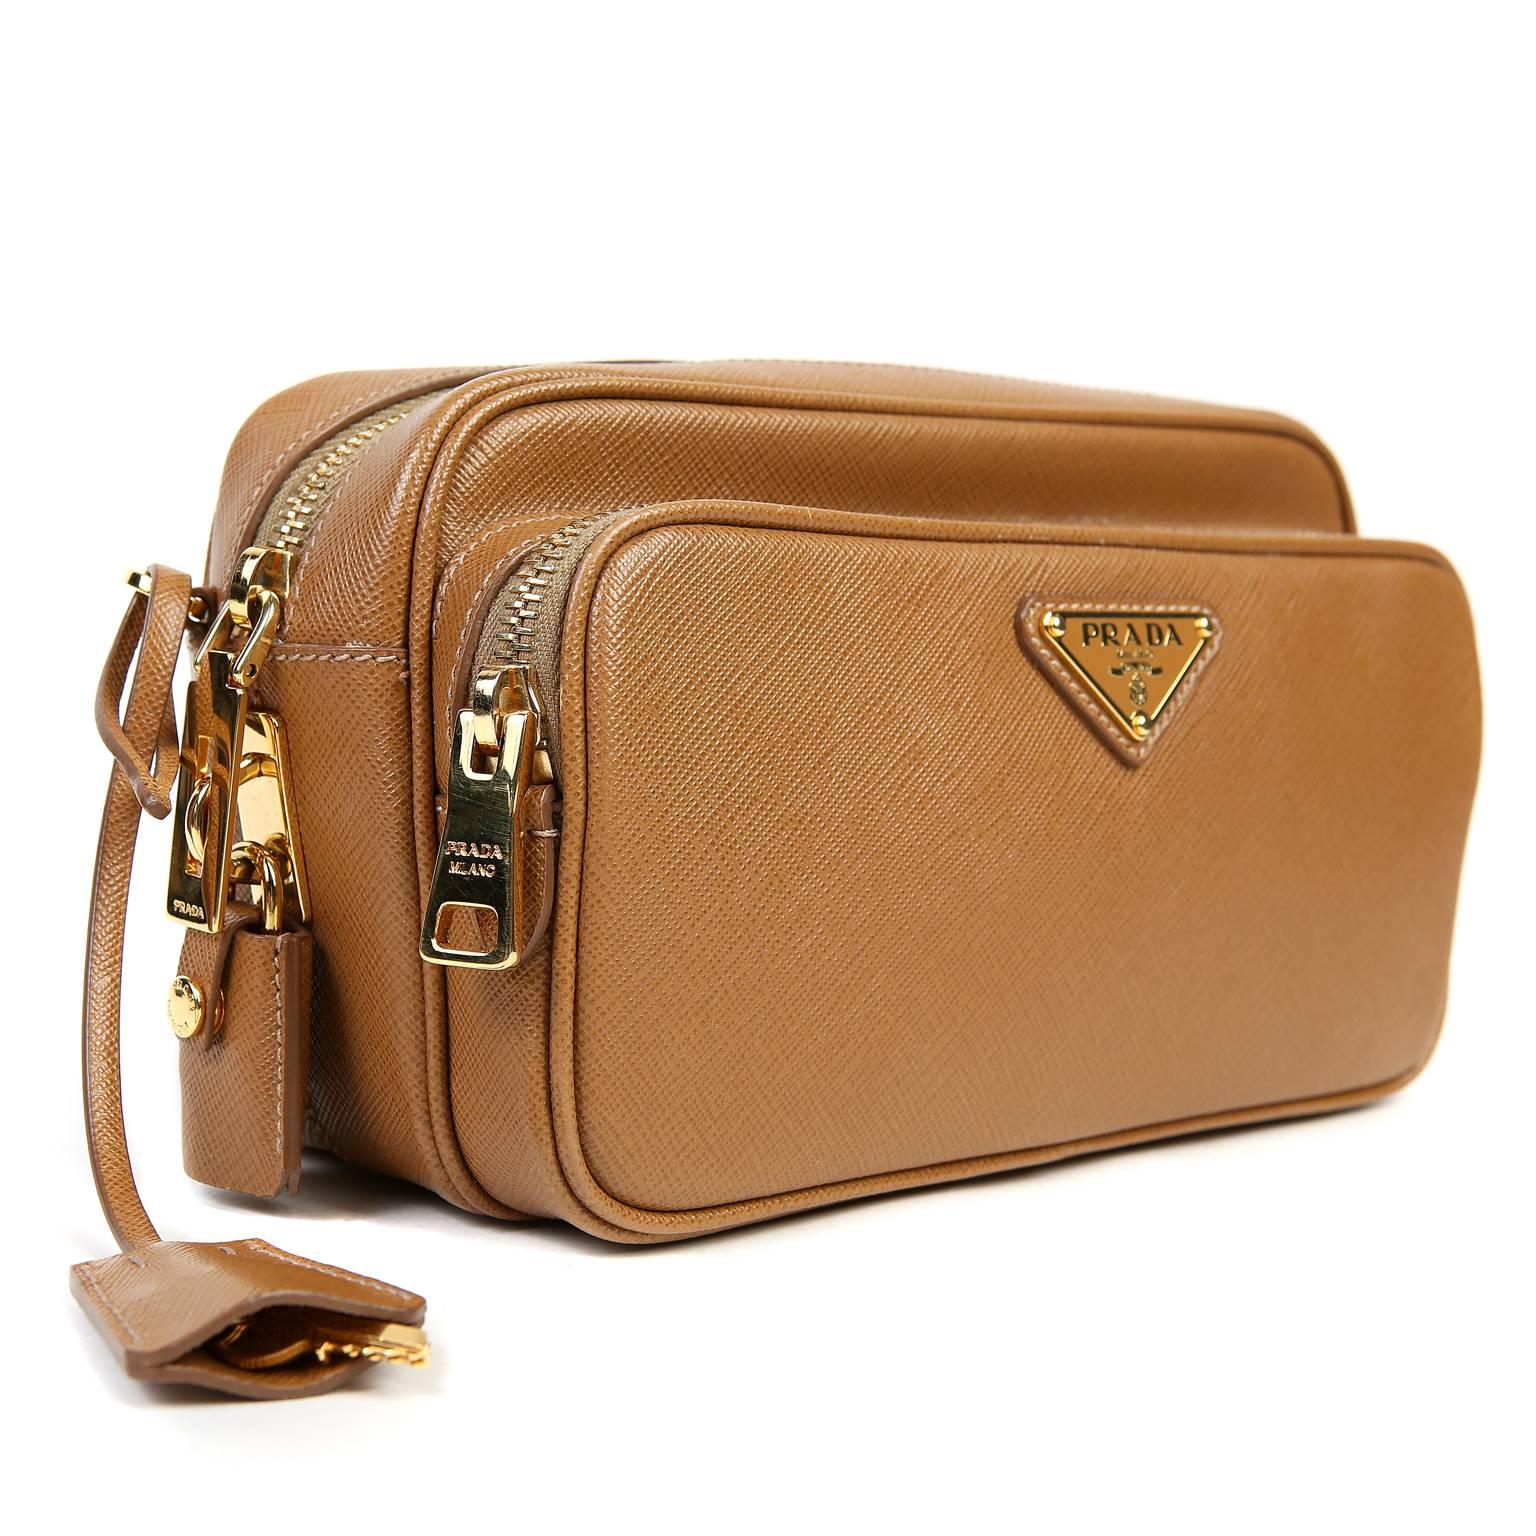 Prada Camel Leather Double Zip Crossbody Bag - Near Pristine
 A fantastic find, this deceptively petite piece carries quite a bit and has the advantage of being hands free. 

Durable and textured Camel lux Saffiano leather with gold tone hardware